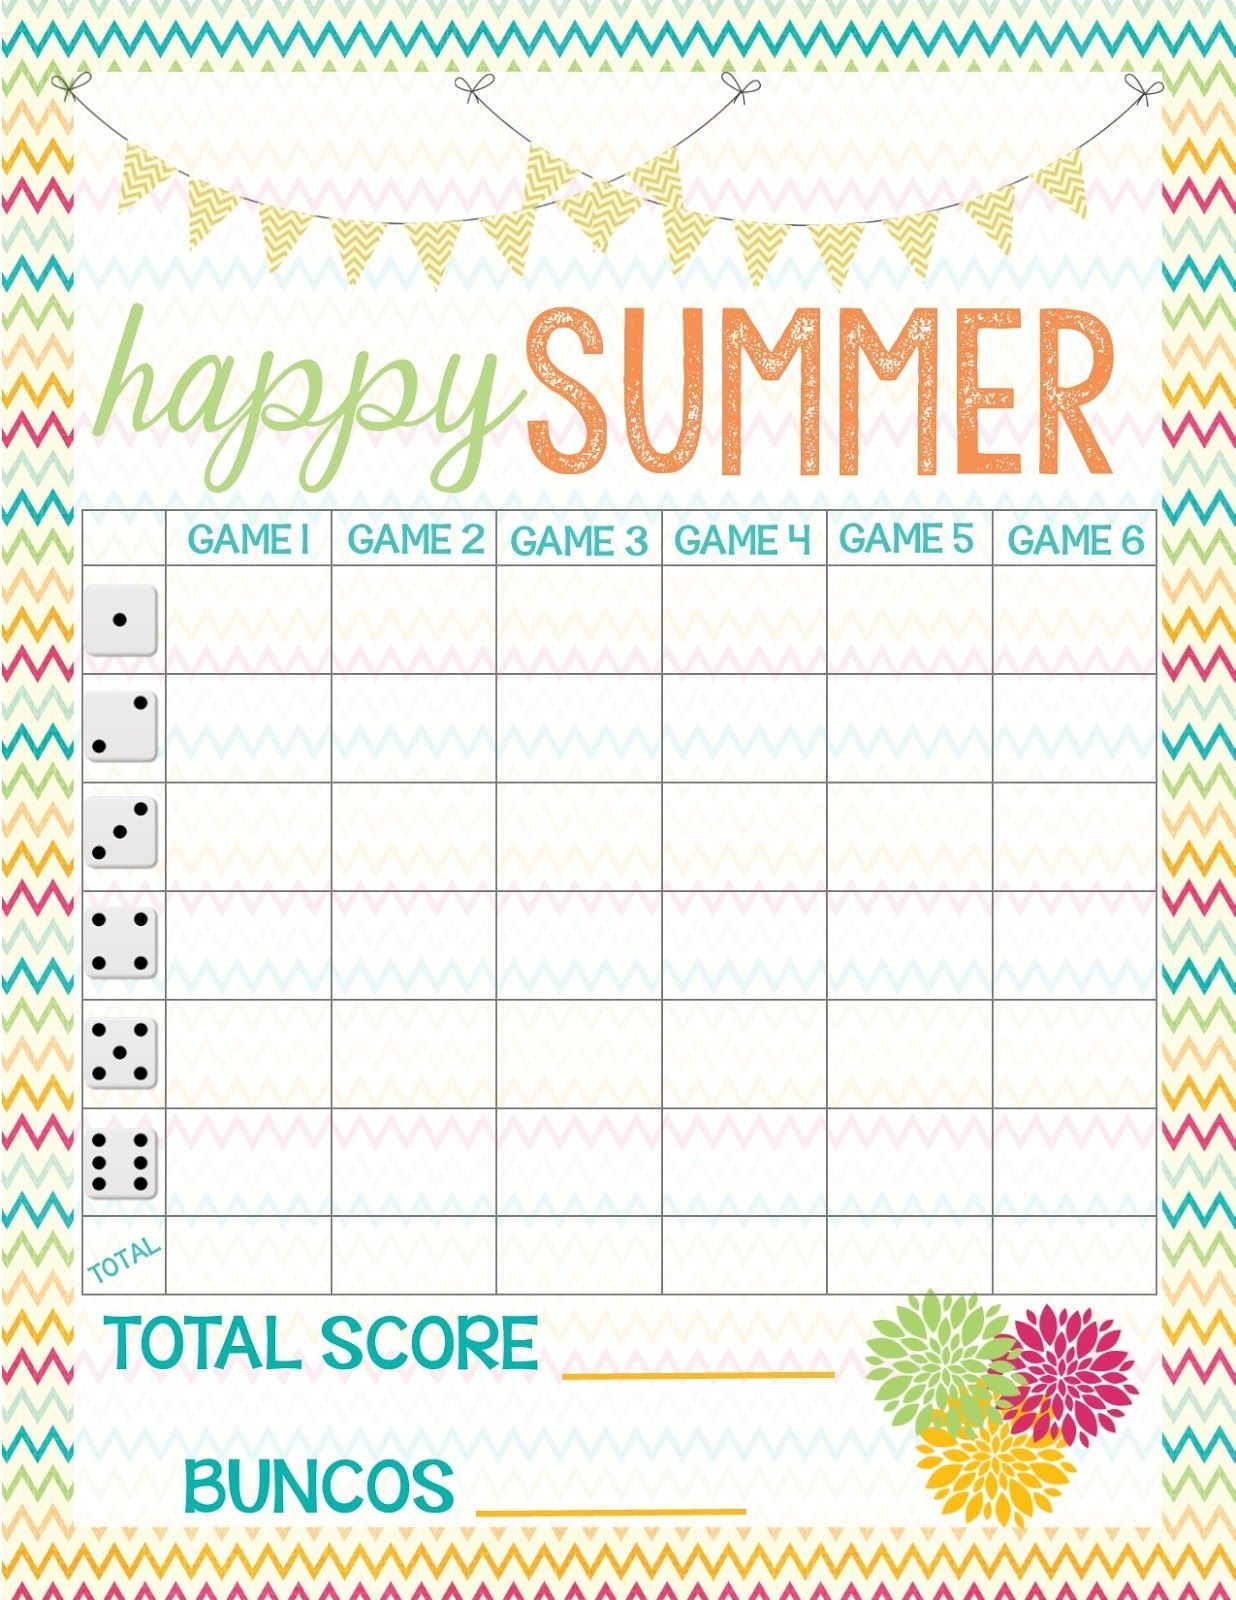 Recipes From Stephanie: Free Bunco Score Sheet | Bunco In 2019 - Printable Bunco Score Cards Free